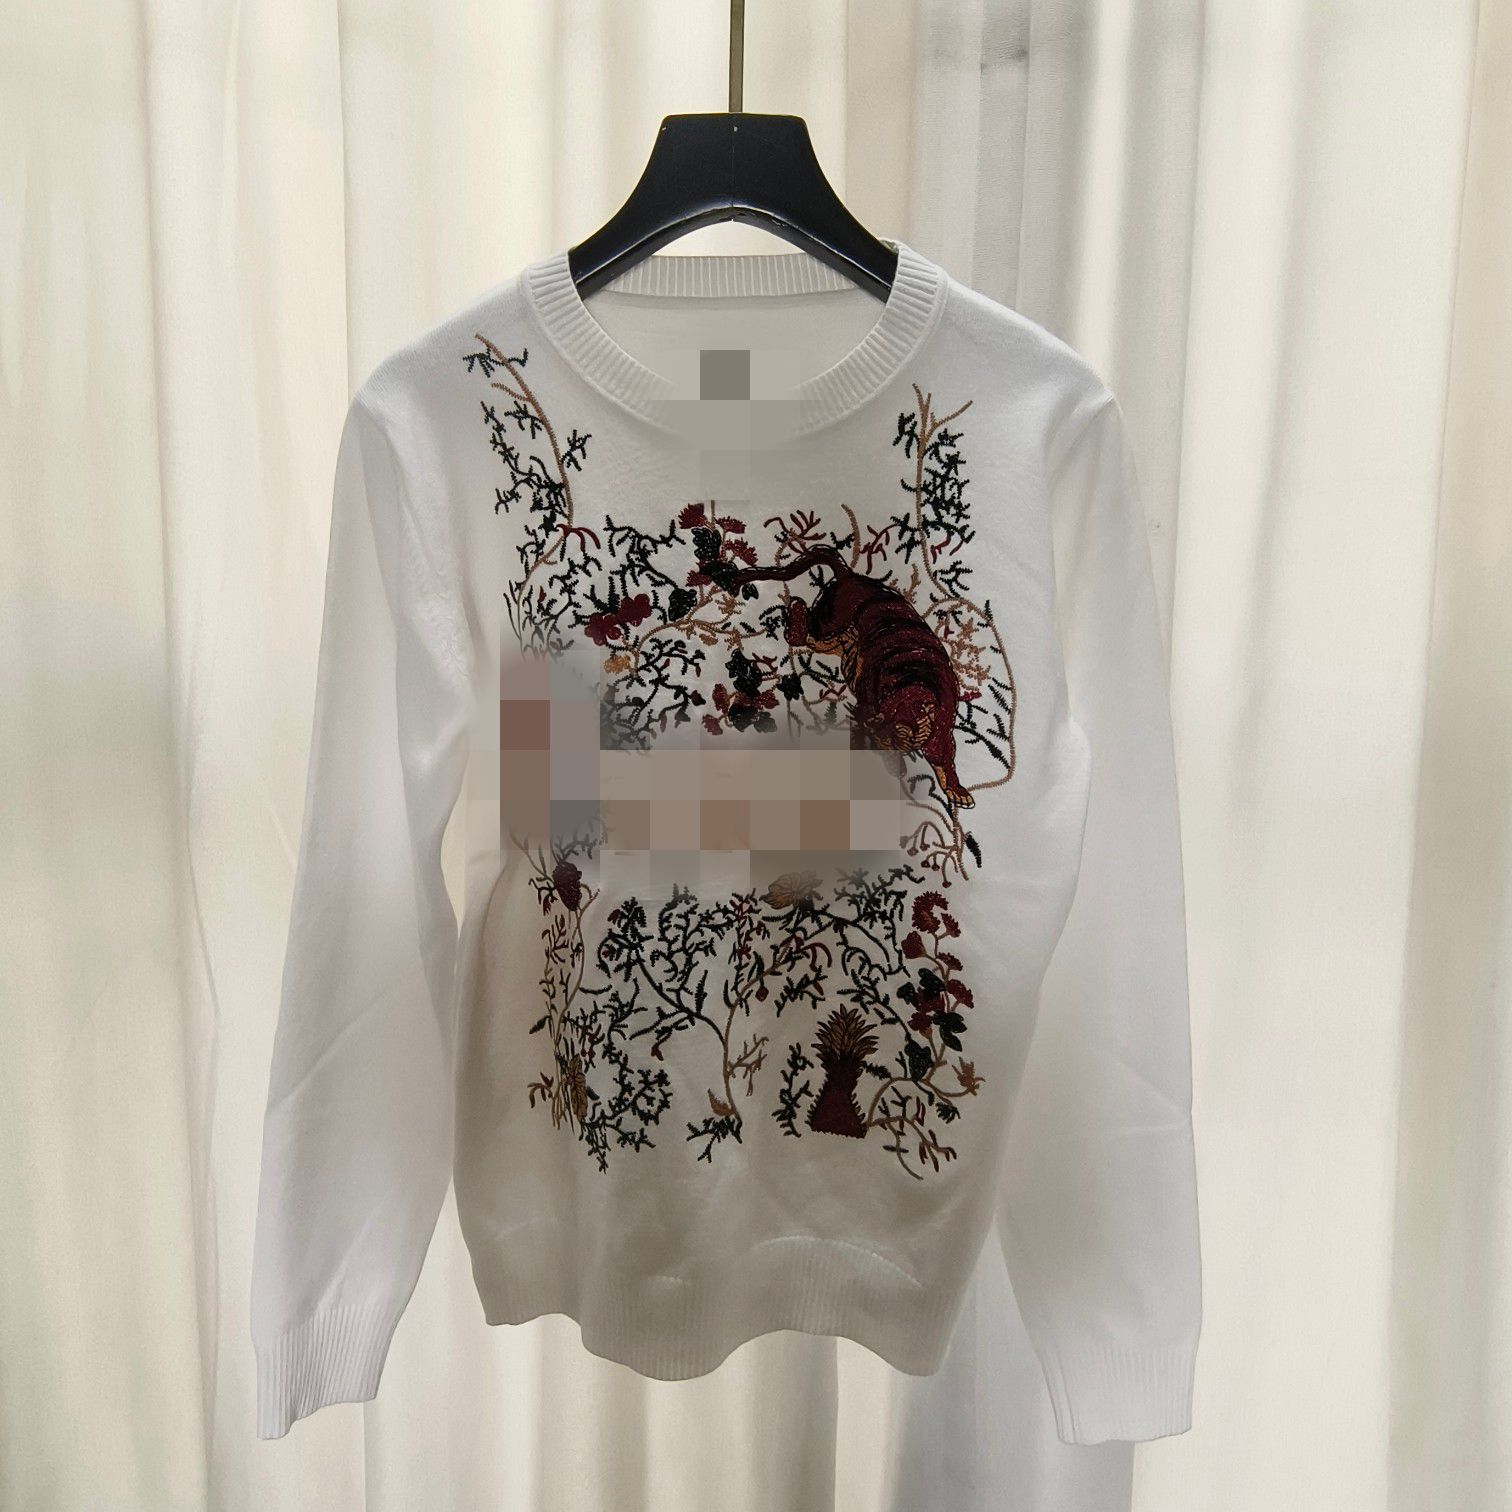 2023 Gray/White Floral Print Women's Pullover Brand Same Style Women's Sweaters DH027